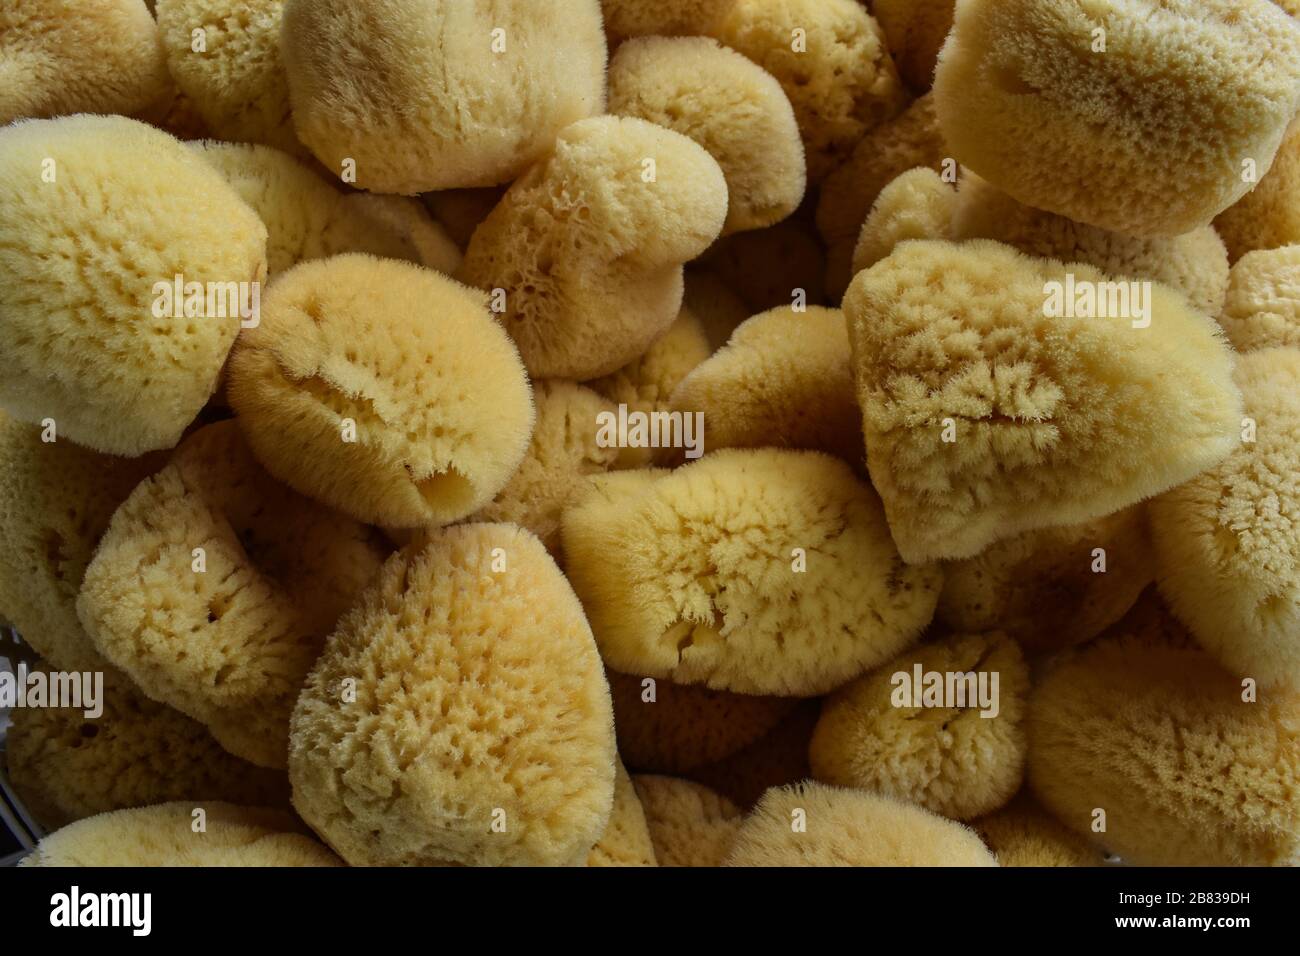 Background of natural sponges in Tarpon Springs, Florida Stock Photo